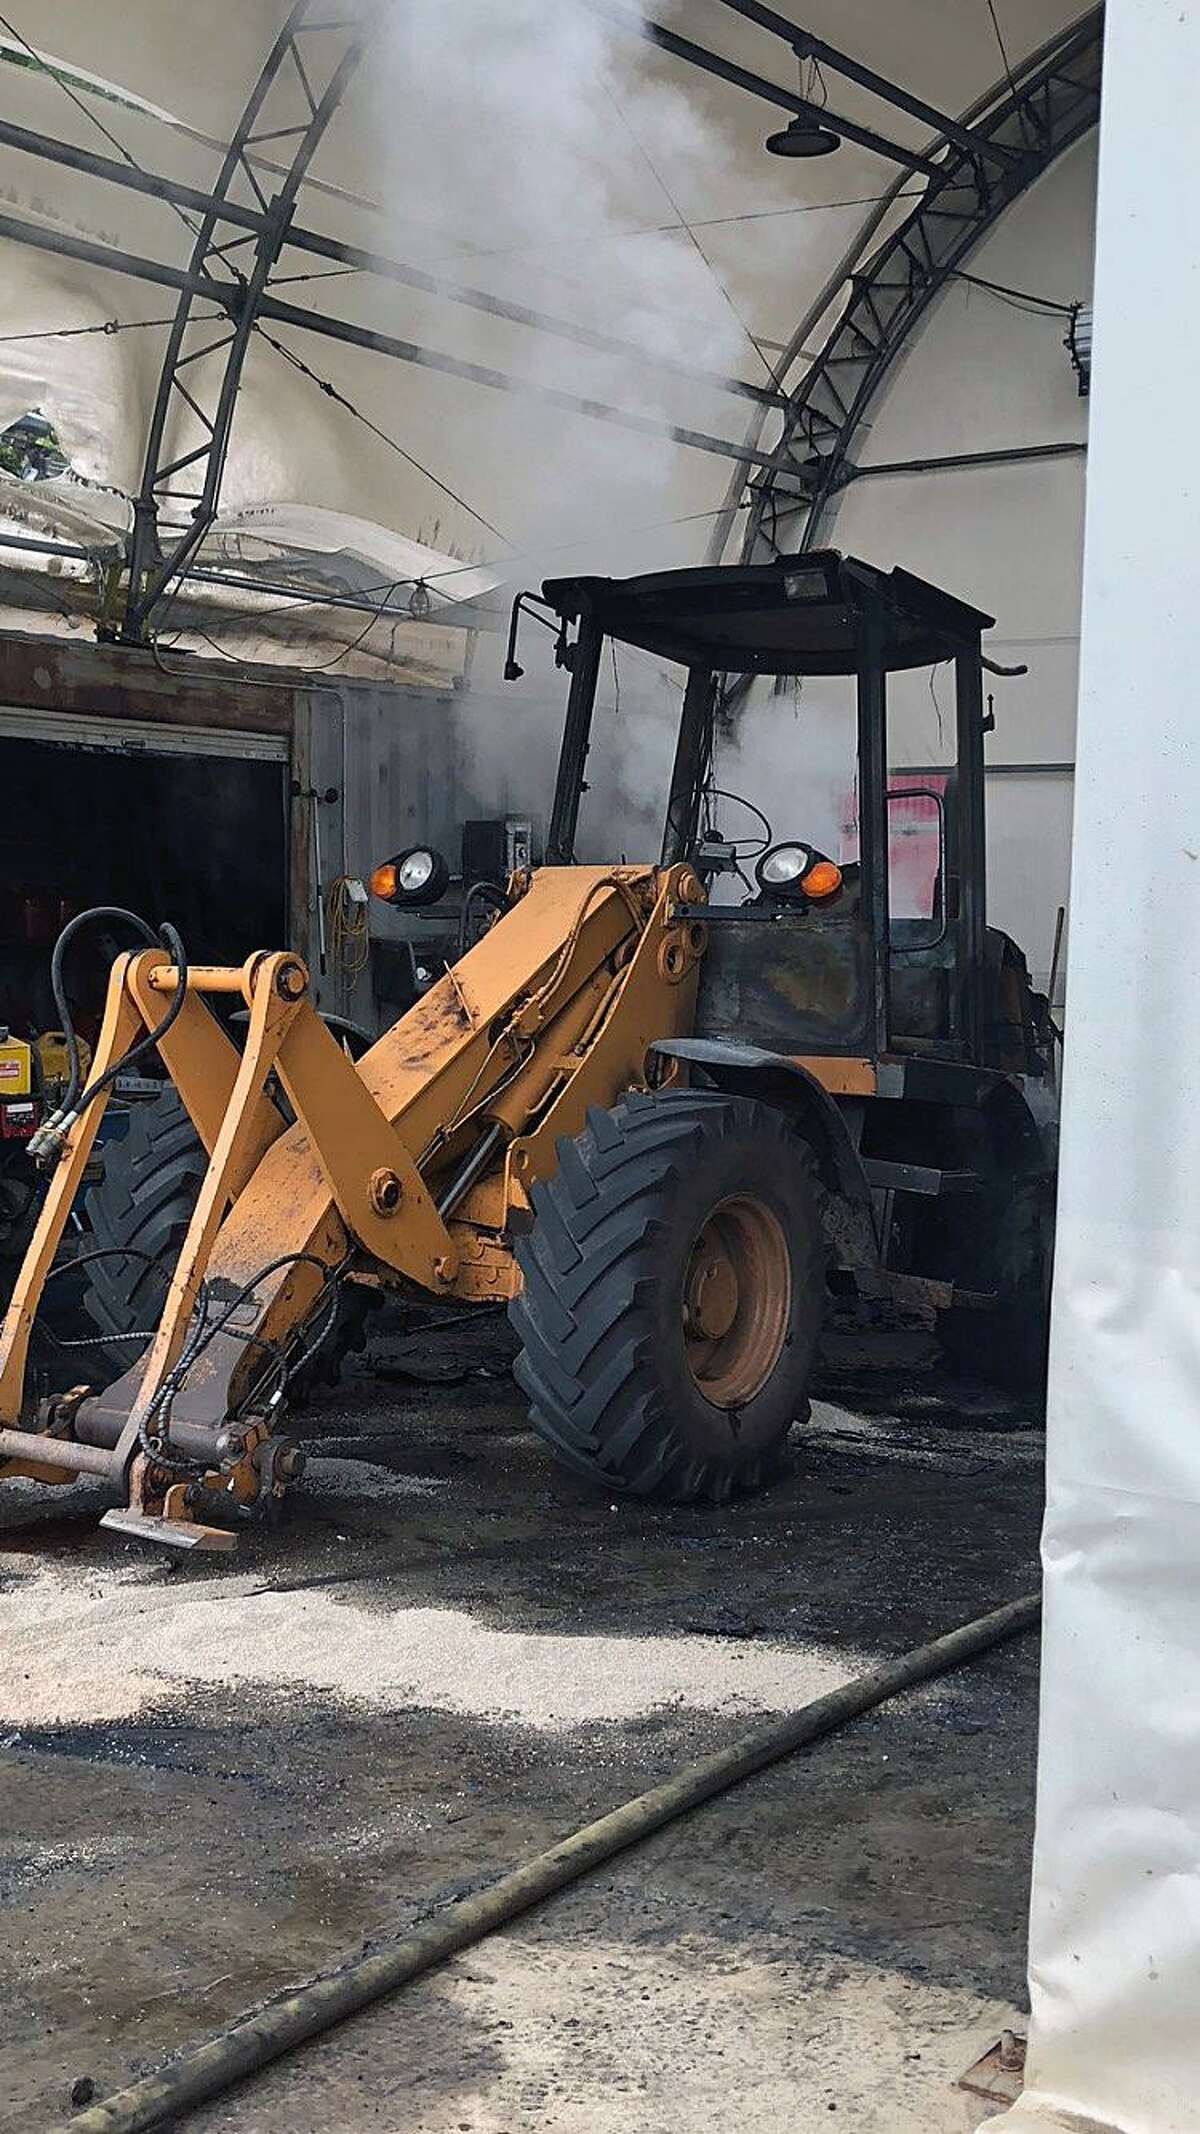 Fire units from the Monroe, Stepney and Stevenson fire departments responded to 189 Monroe Turnpike in Monroe, Conn., on June 6, 2018, for a front loader tractor on fire in the garage, Fire Marshal William Davin said.